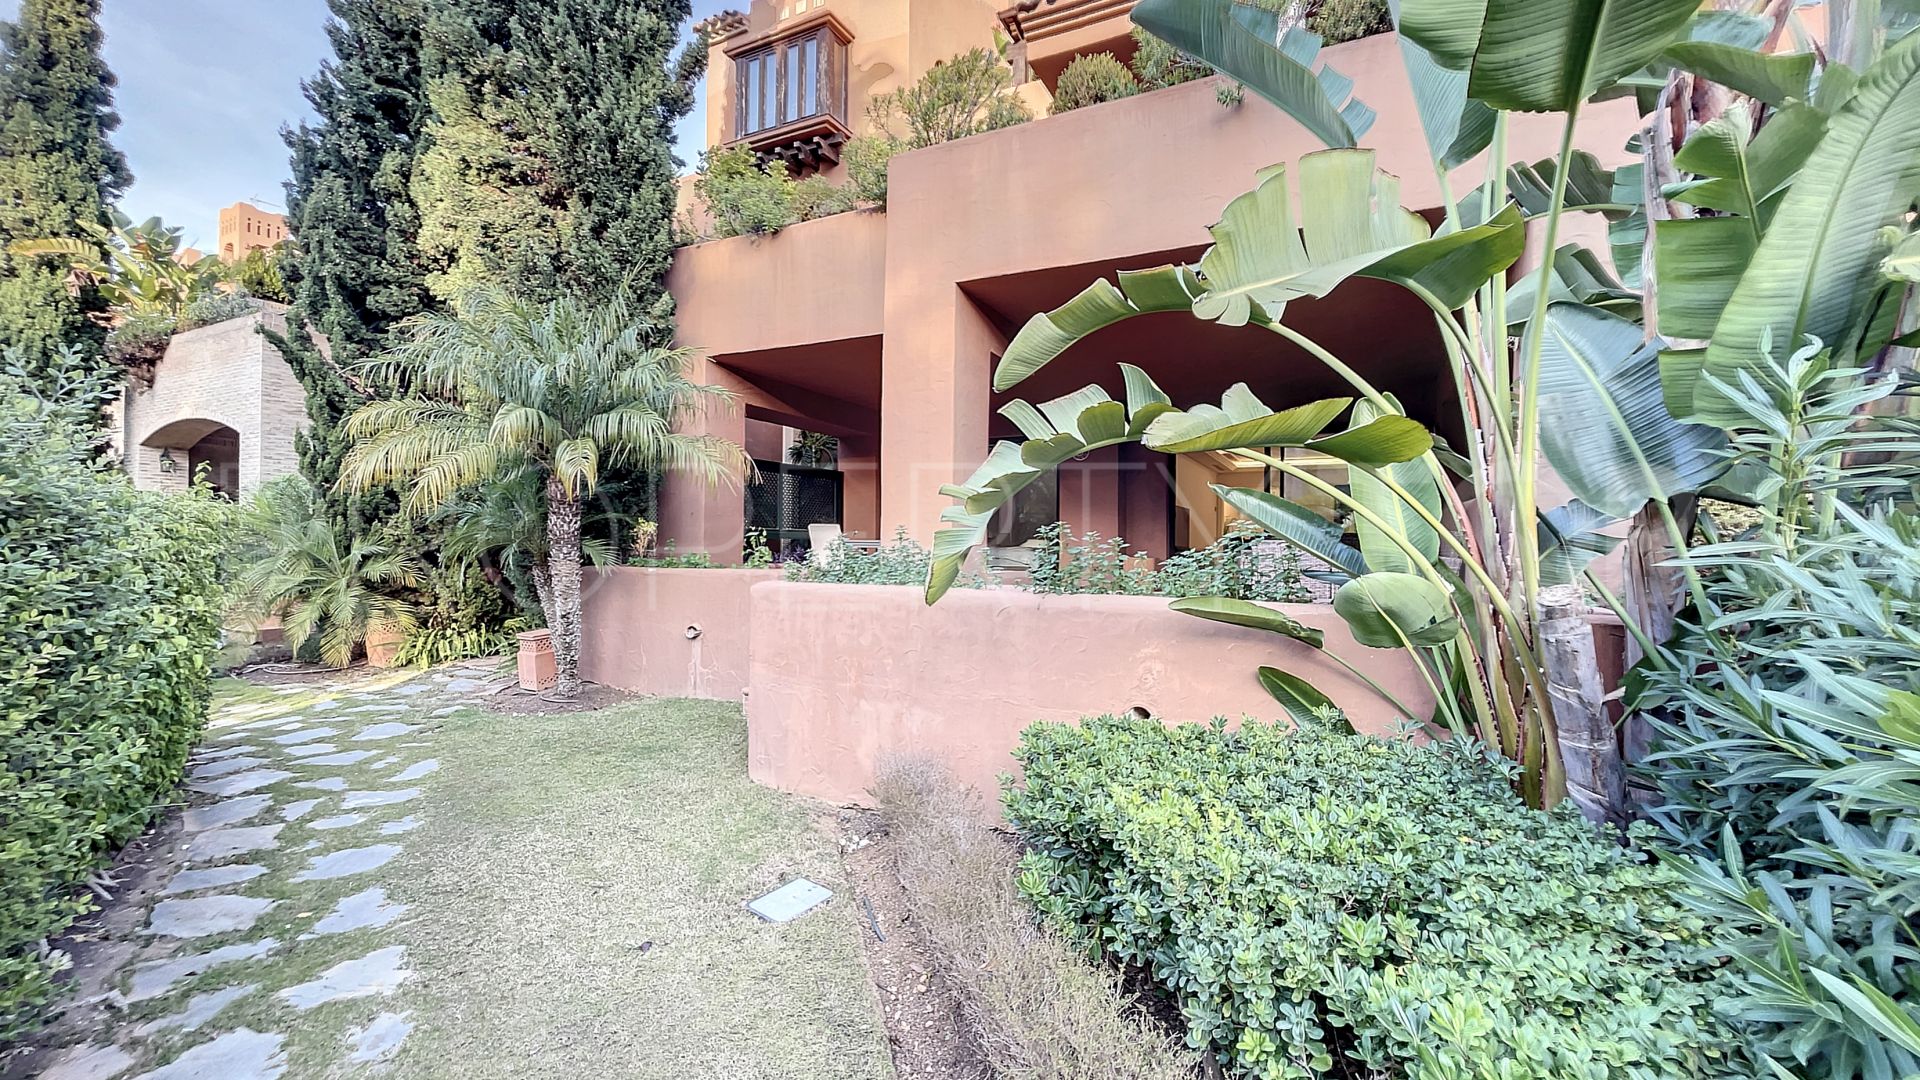 For sale apartment in Alhambra los Granados with 2 bedrooms